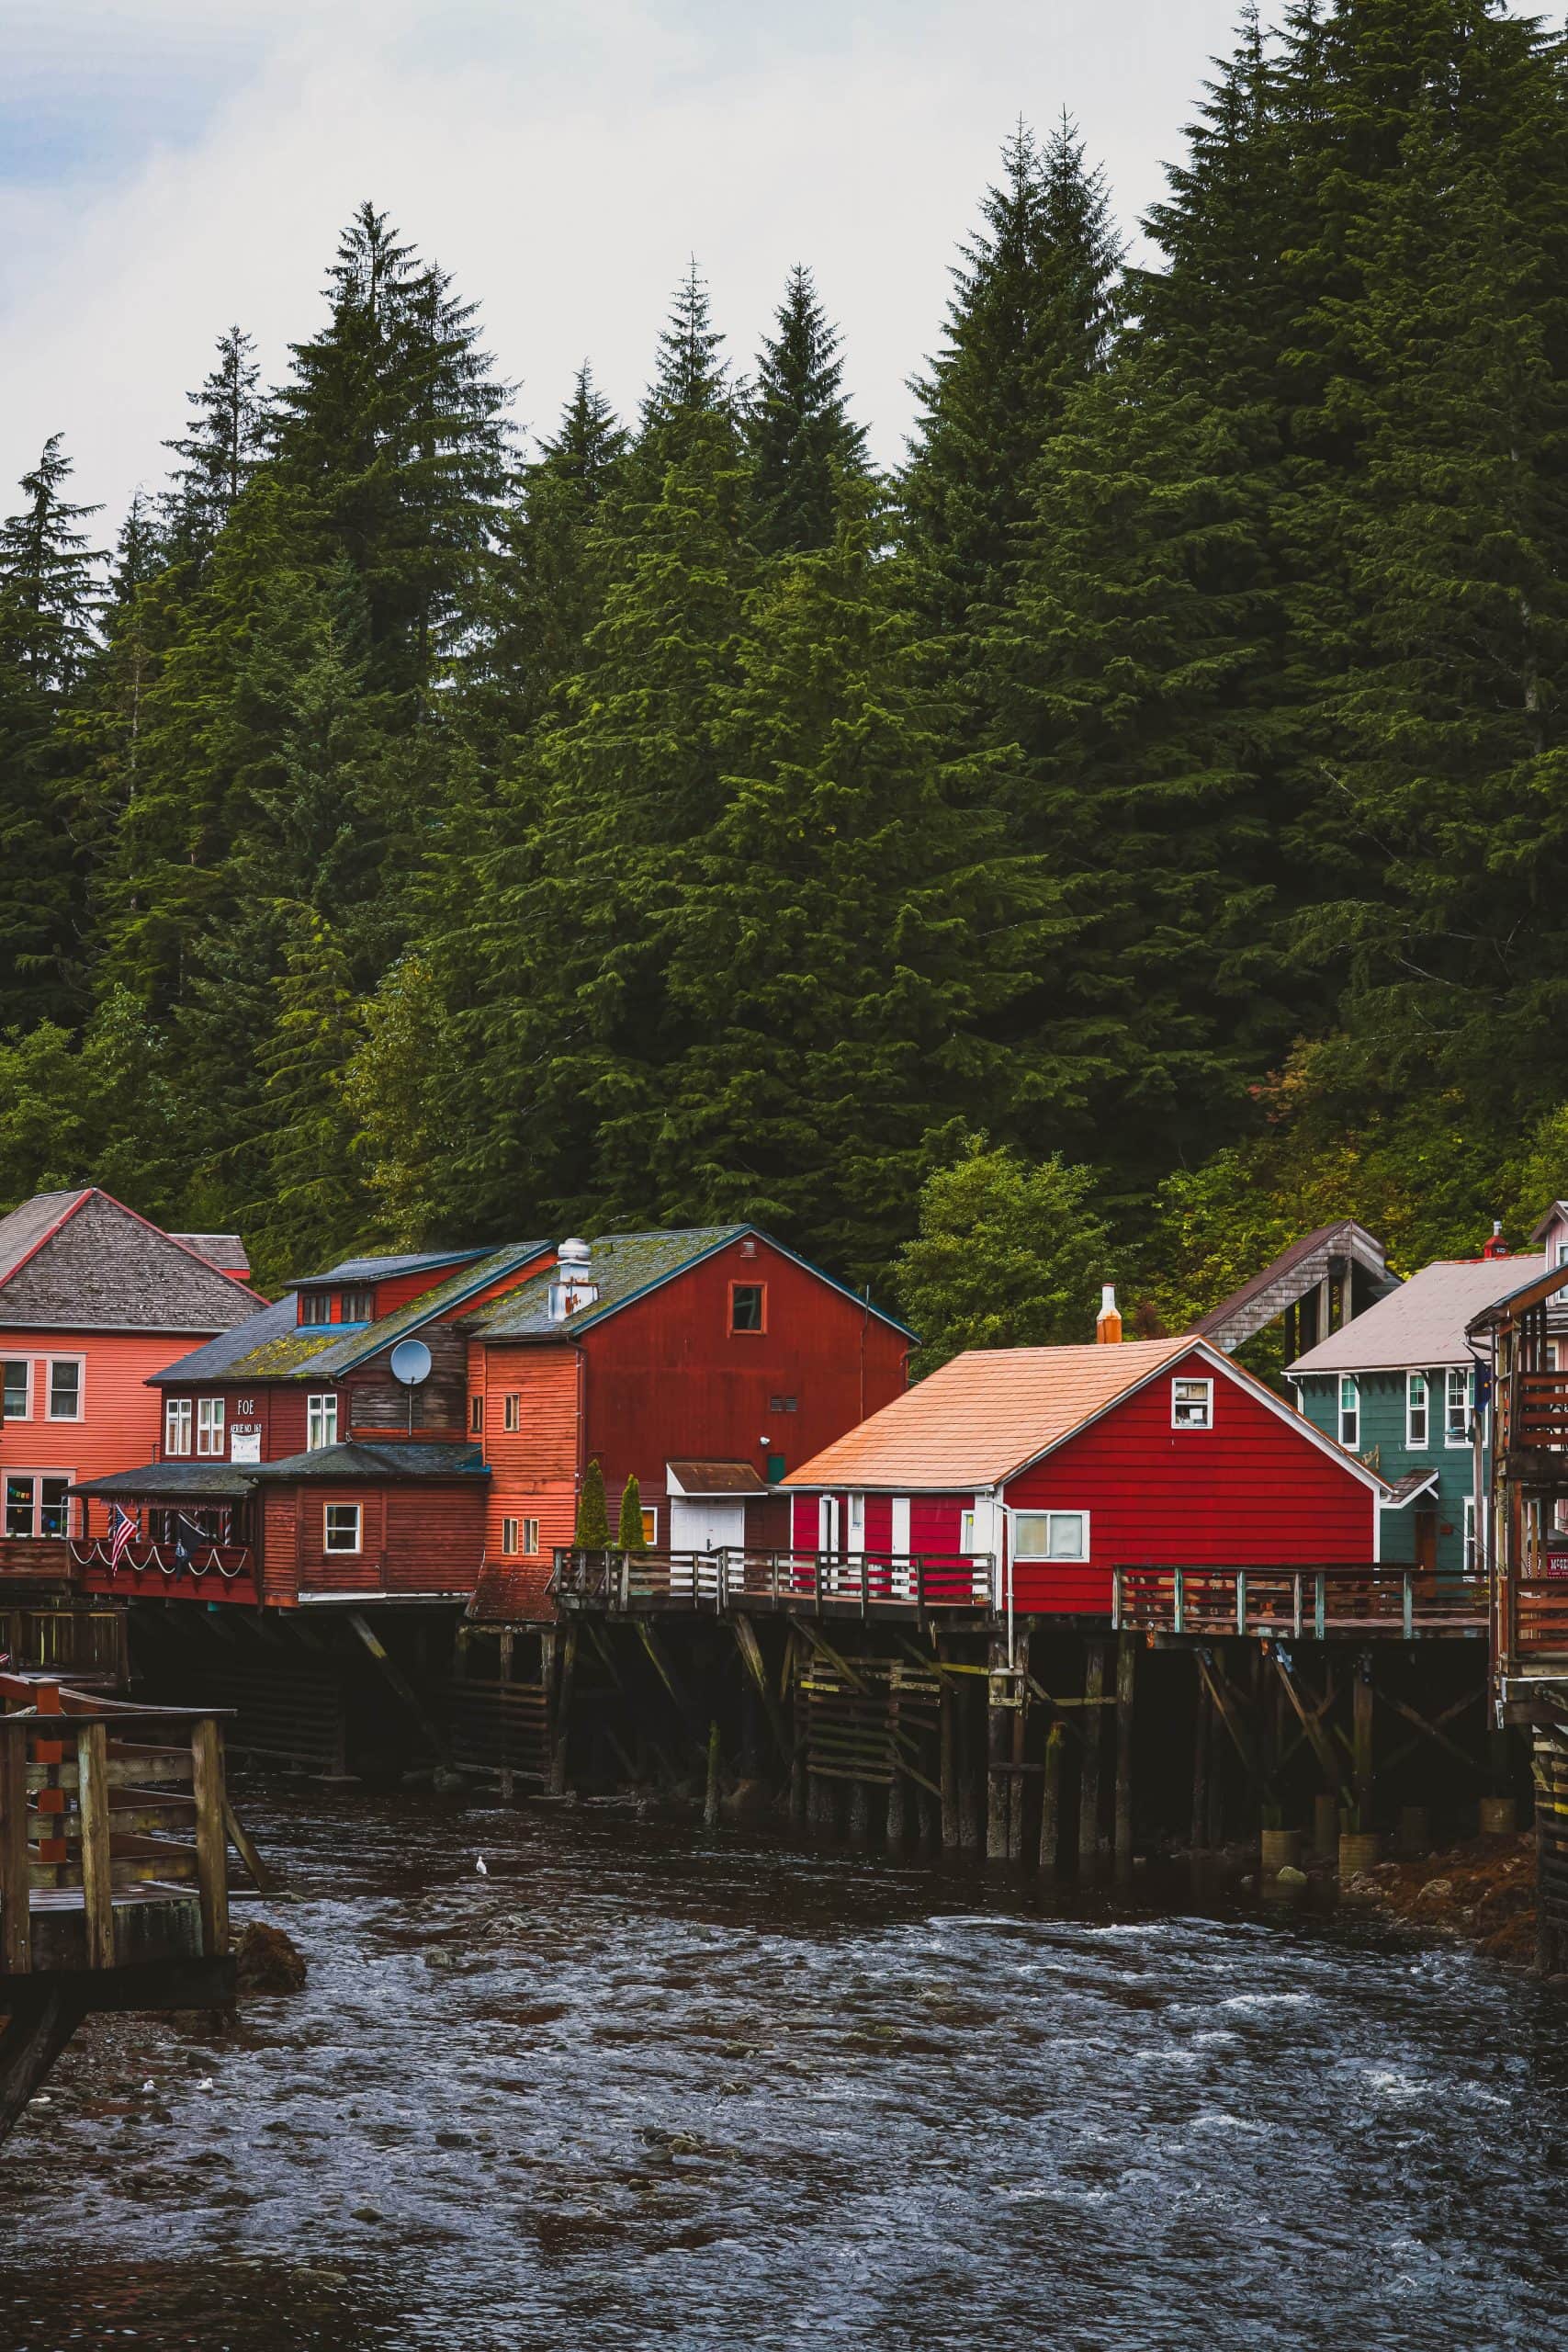 A group of red houses on the shore of a body of water near Princess Cruises Alaska.